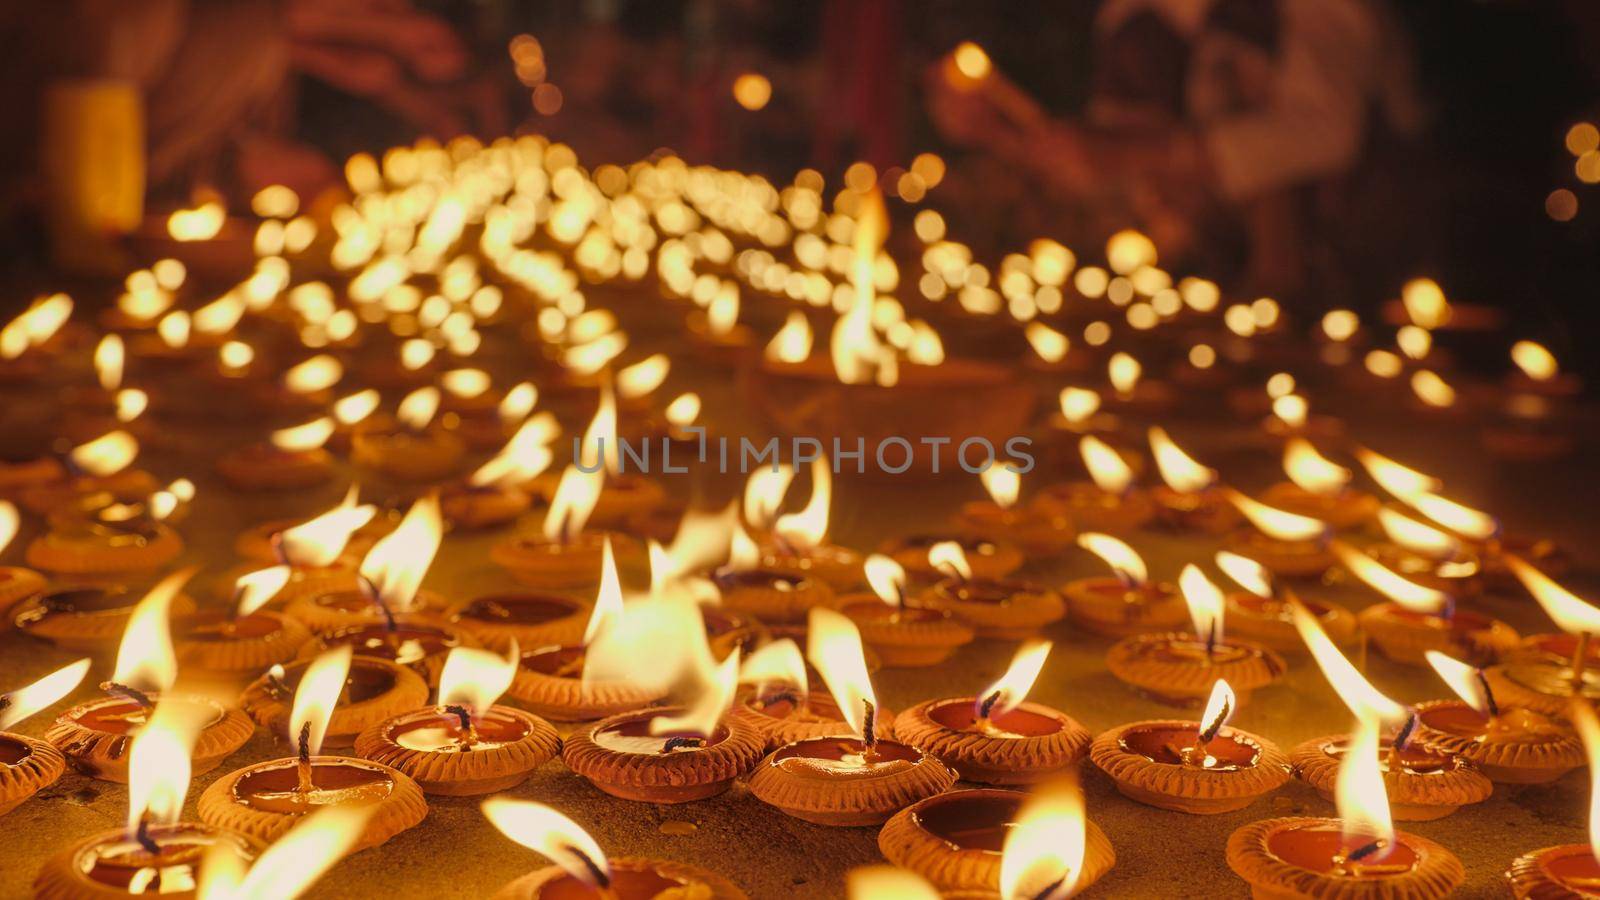 candlelight in religion ceremony with shallow depth of field by toa55